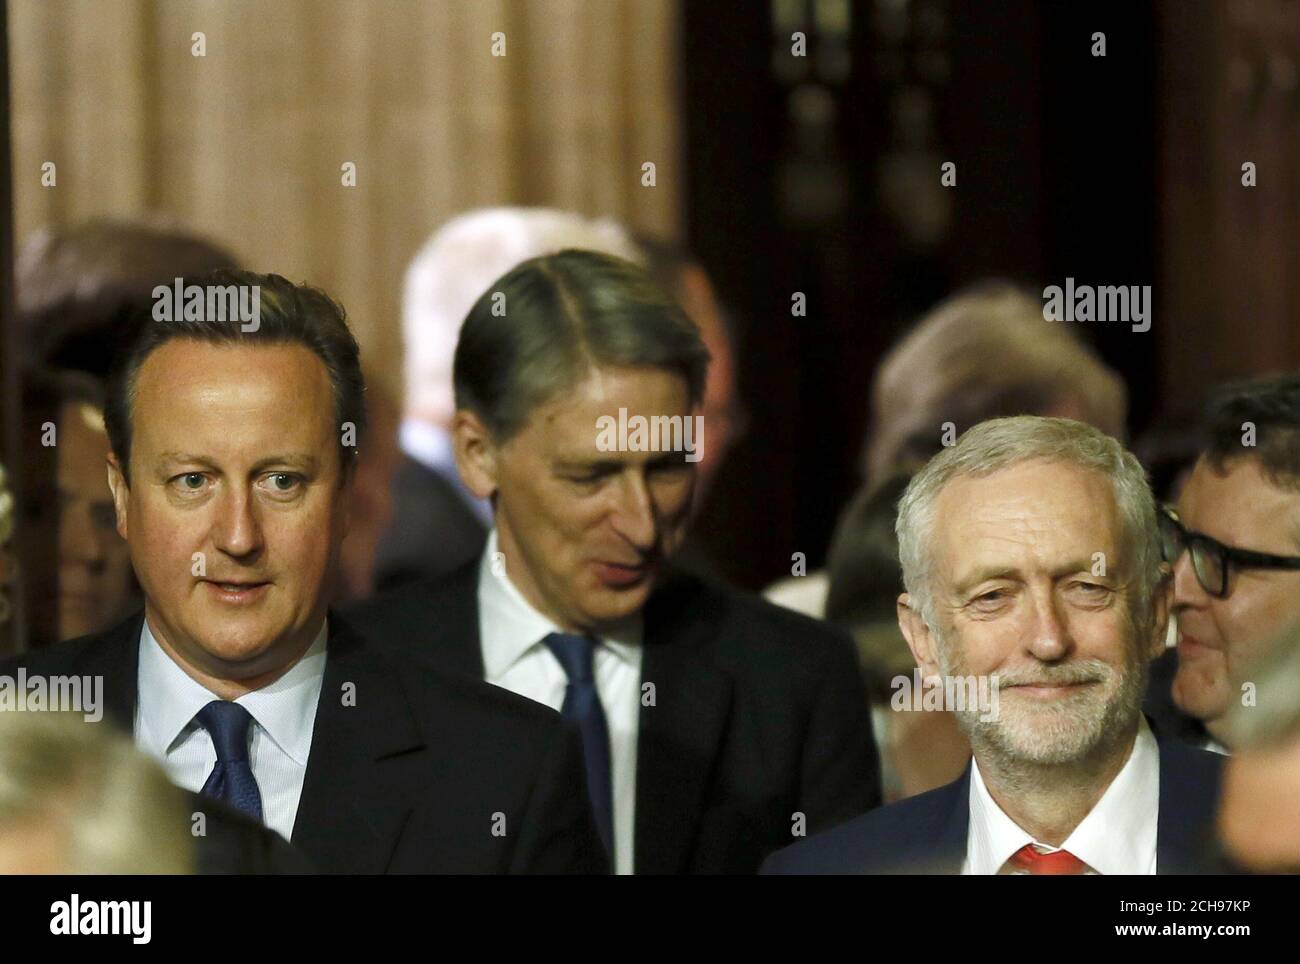 Prime Minister David Cameron (left), Foreign Secretary Philip Hammond and Labour Party leader Jeremy Corbyn (right) walk to the House of Lords for the State Opening of Parliament, at the Palace of Westminster in London. Stock Photo